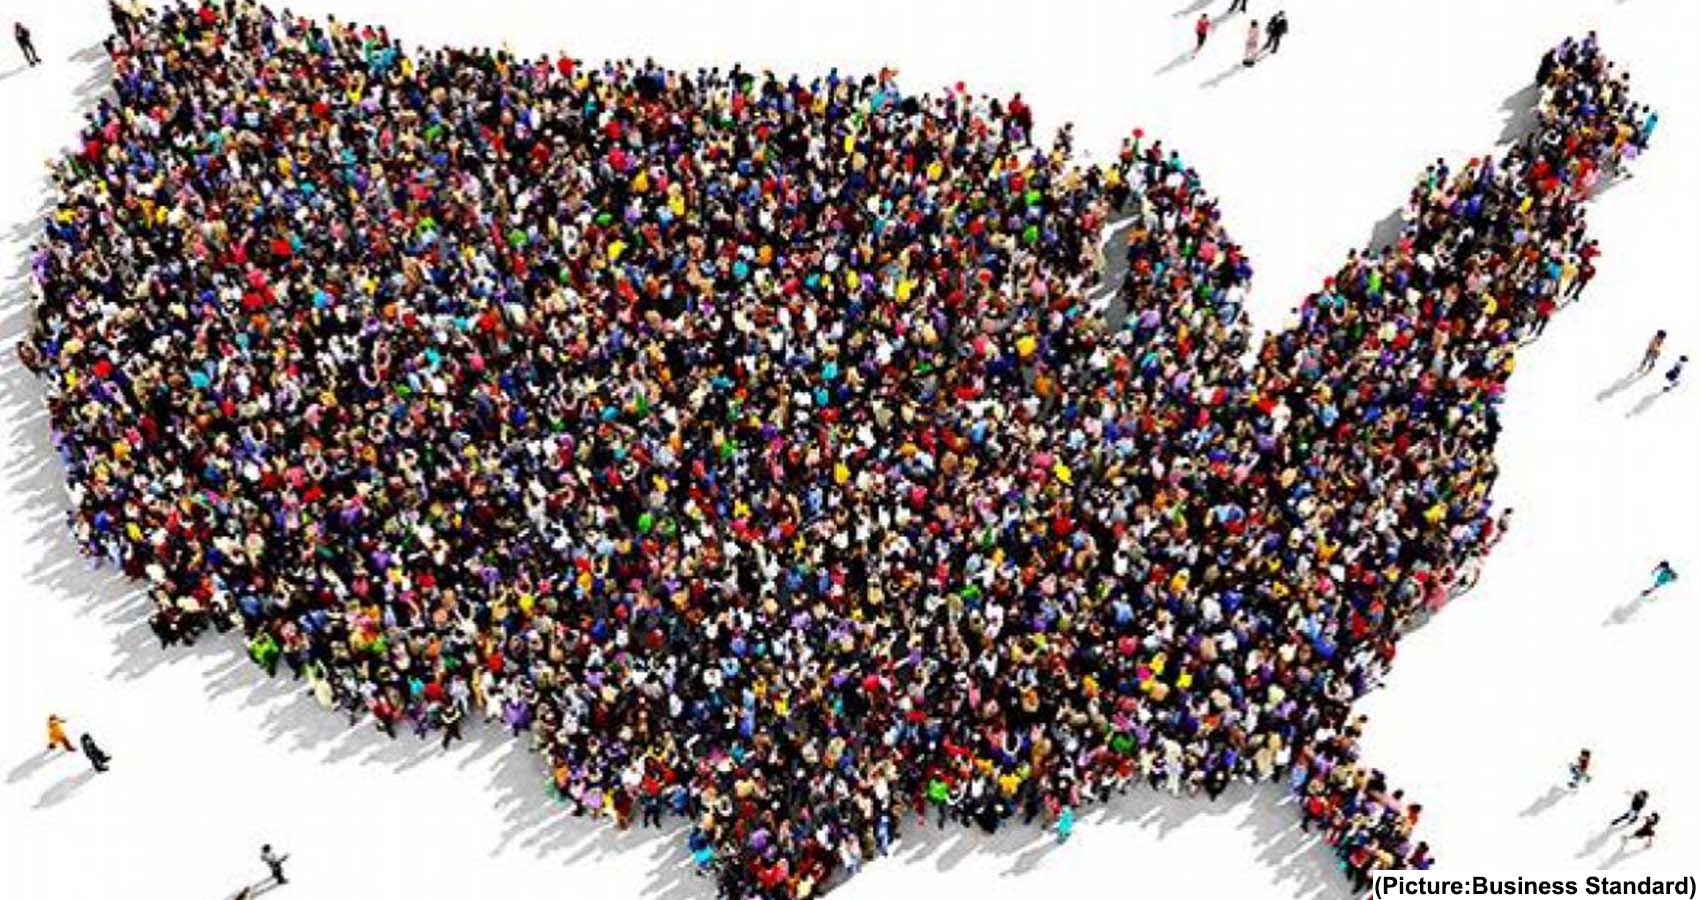 U.S. Population Growth Has Nearly Flatlined, New Census Data Shows